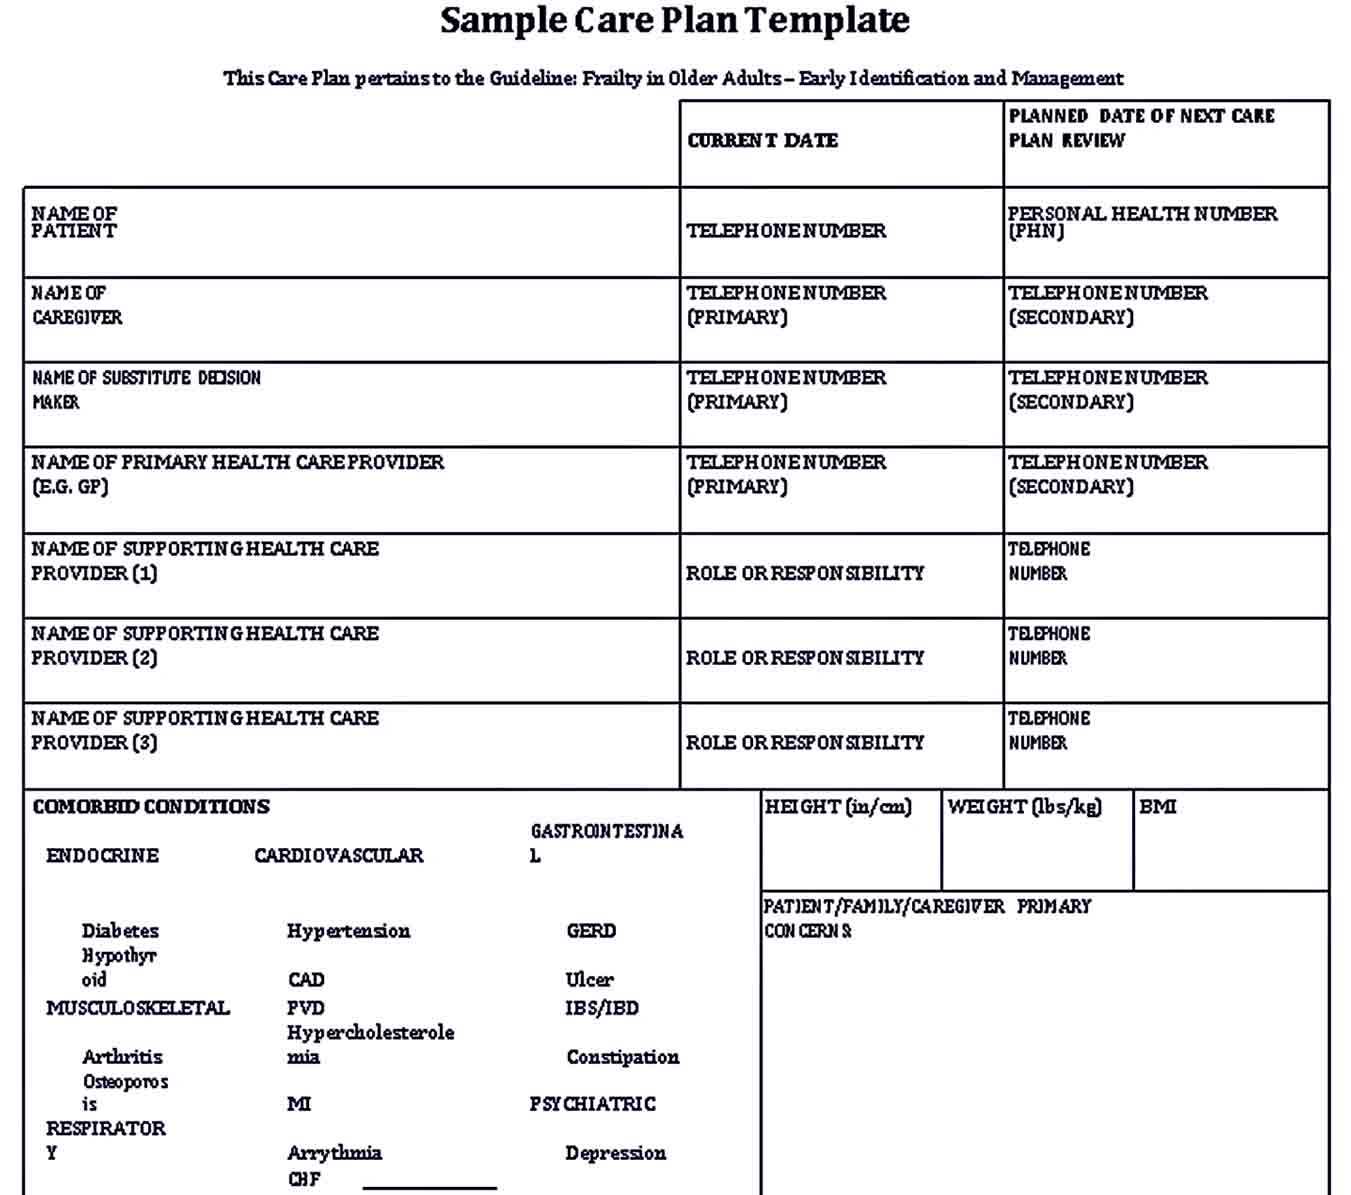 Patient Care Plan Template  room surf.com Within Nursing Care Plan Template Word